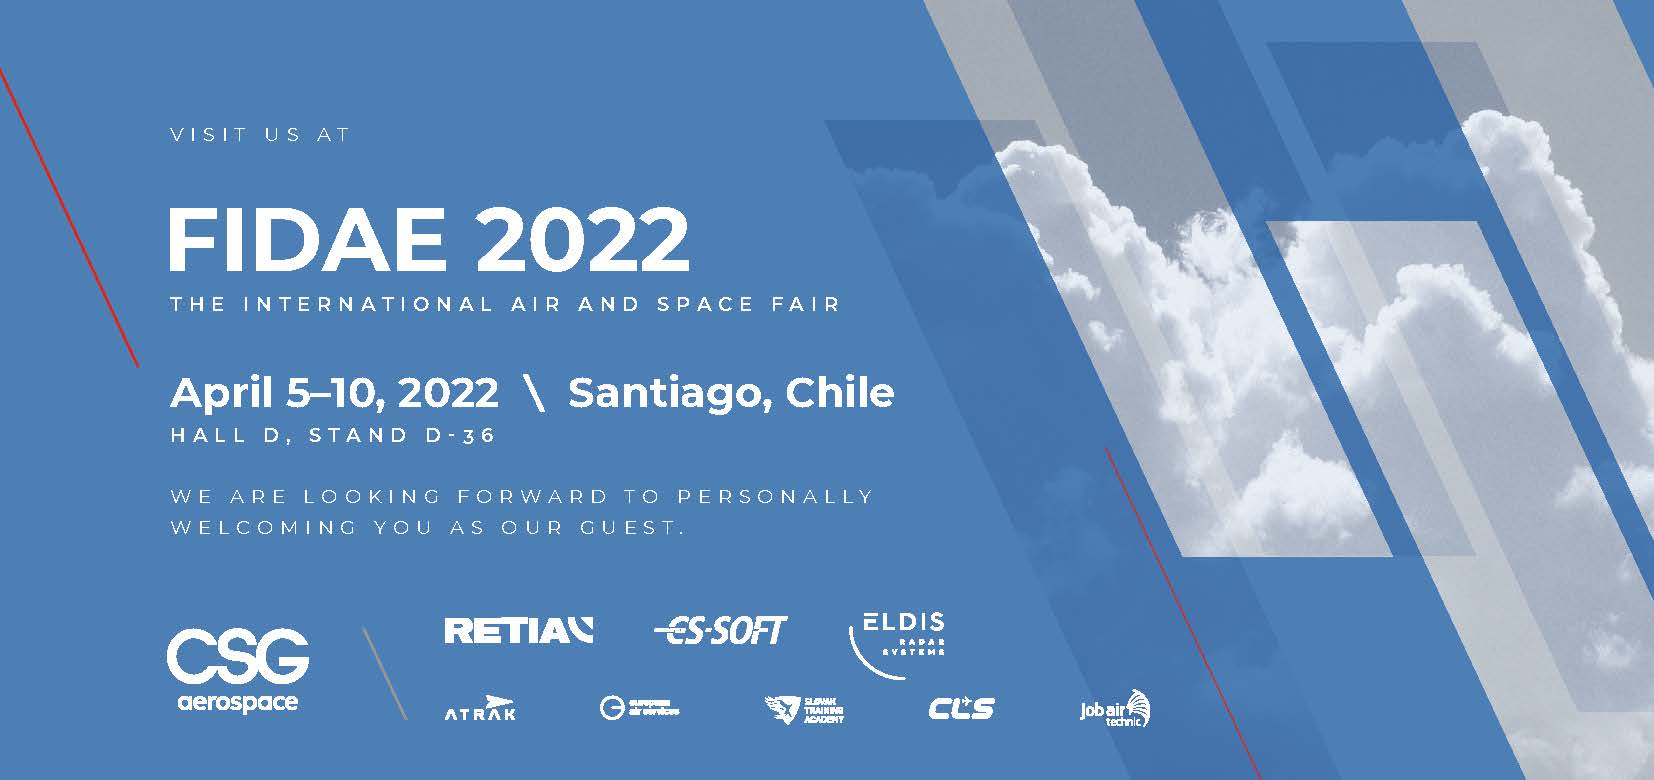 Meet us at FIDAE in Chile 